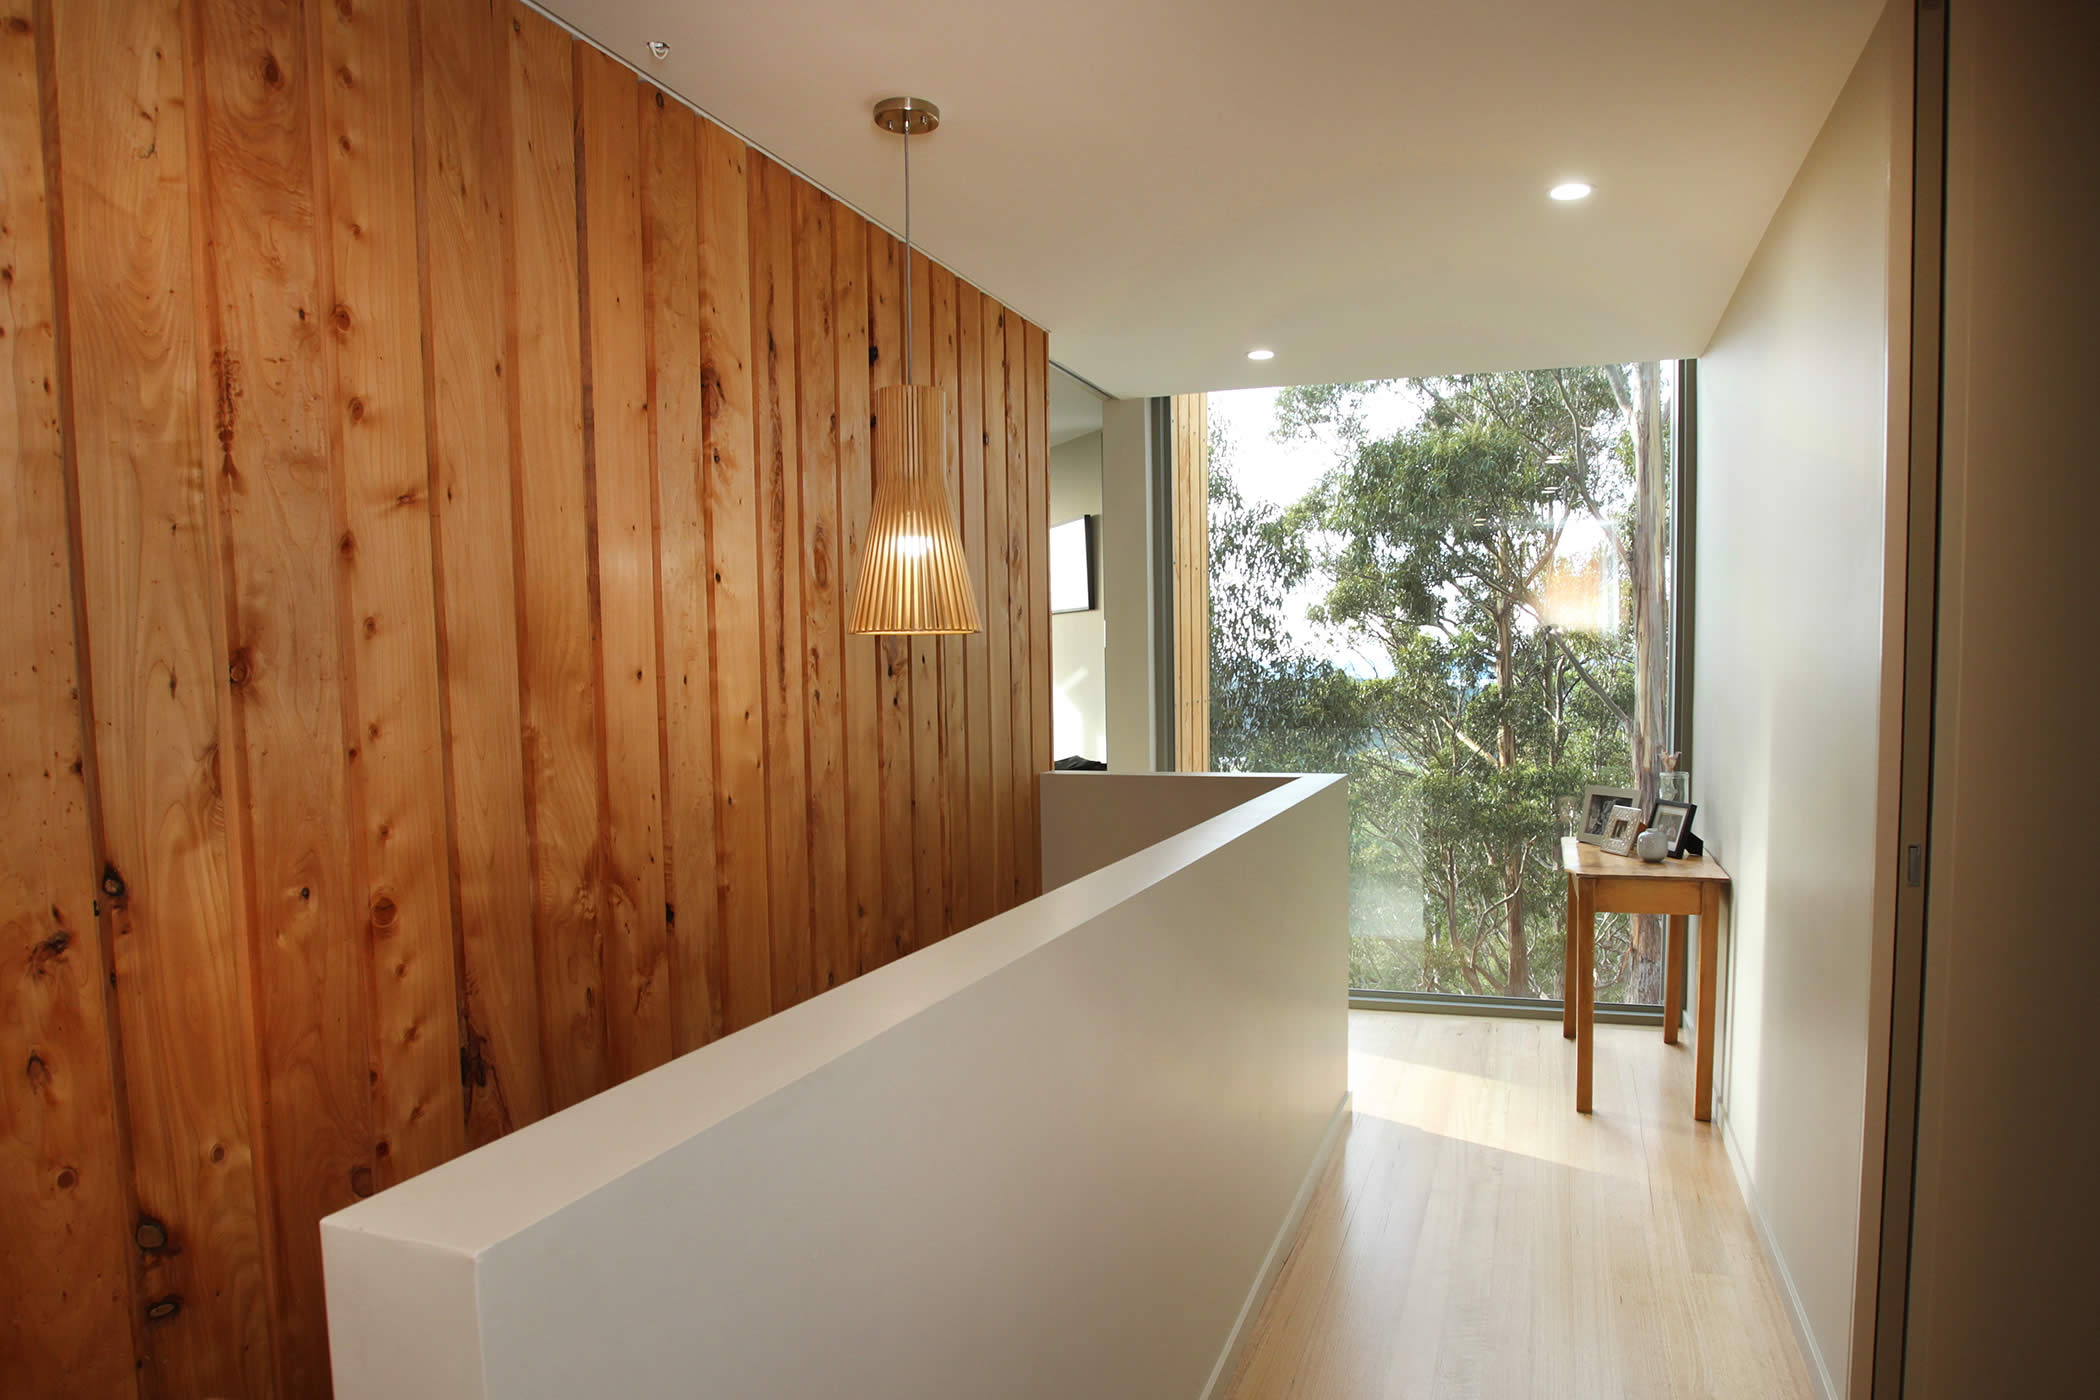 Jamieson Road Residence, Tasmania: We create a memorable effect from the entrance hall by use of natural timber combined with beautiful views through leafy eucalypts to emphasise a natural aesthetic and the country context. Photo by R. Lovell.